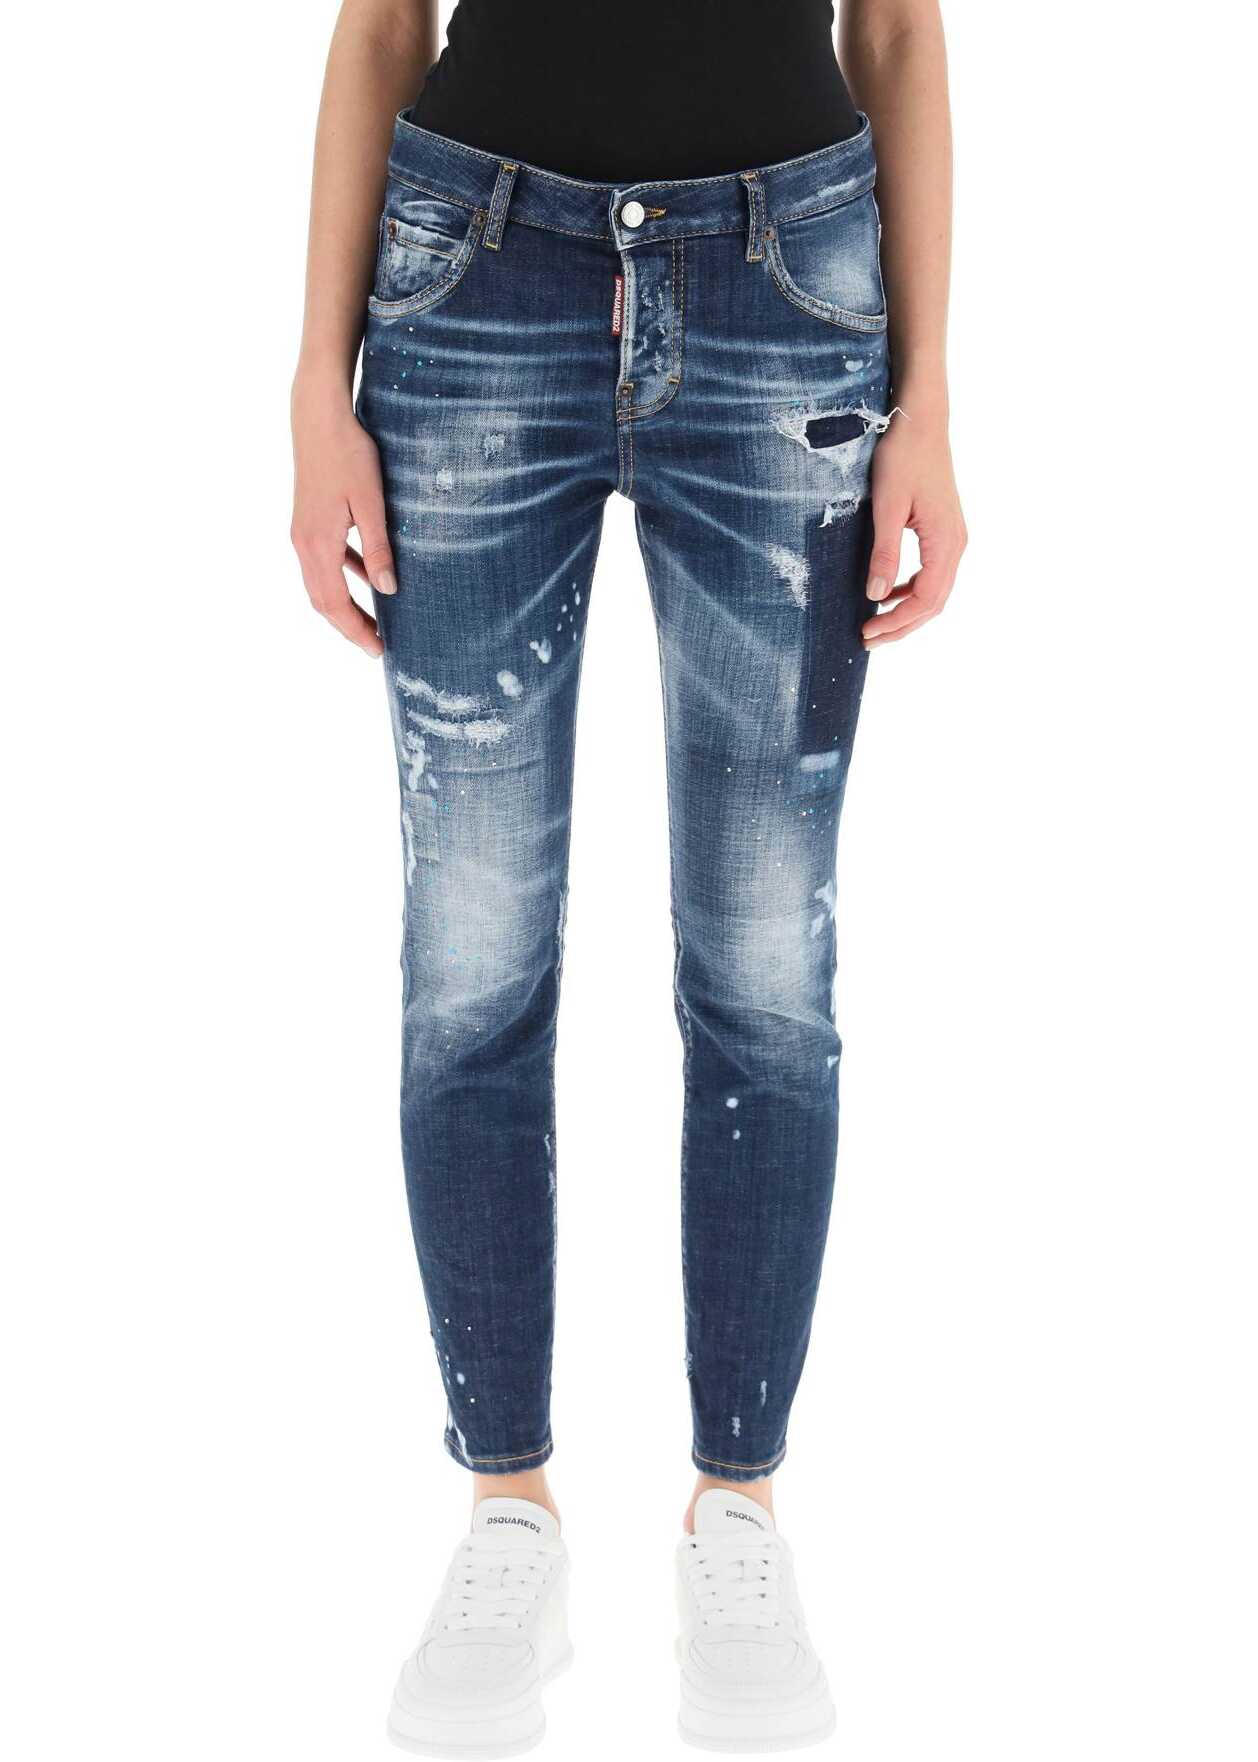 DSQUARED2 Cool Girl Cropped Jeans NAVY BLUE